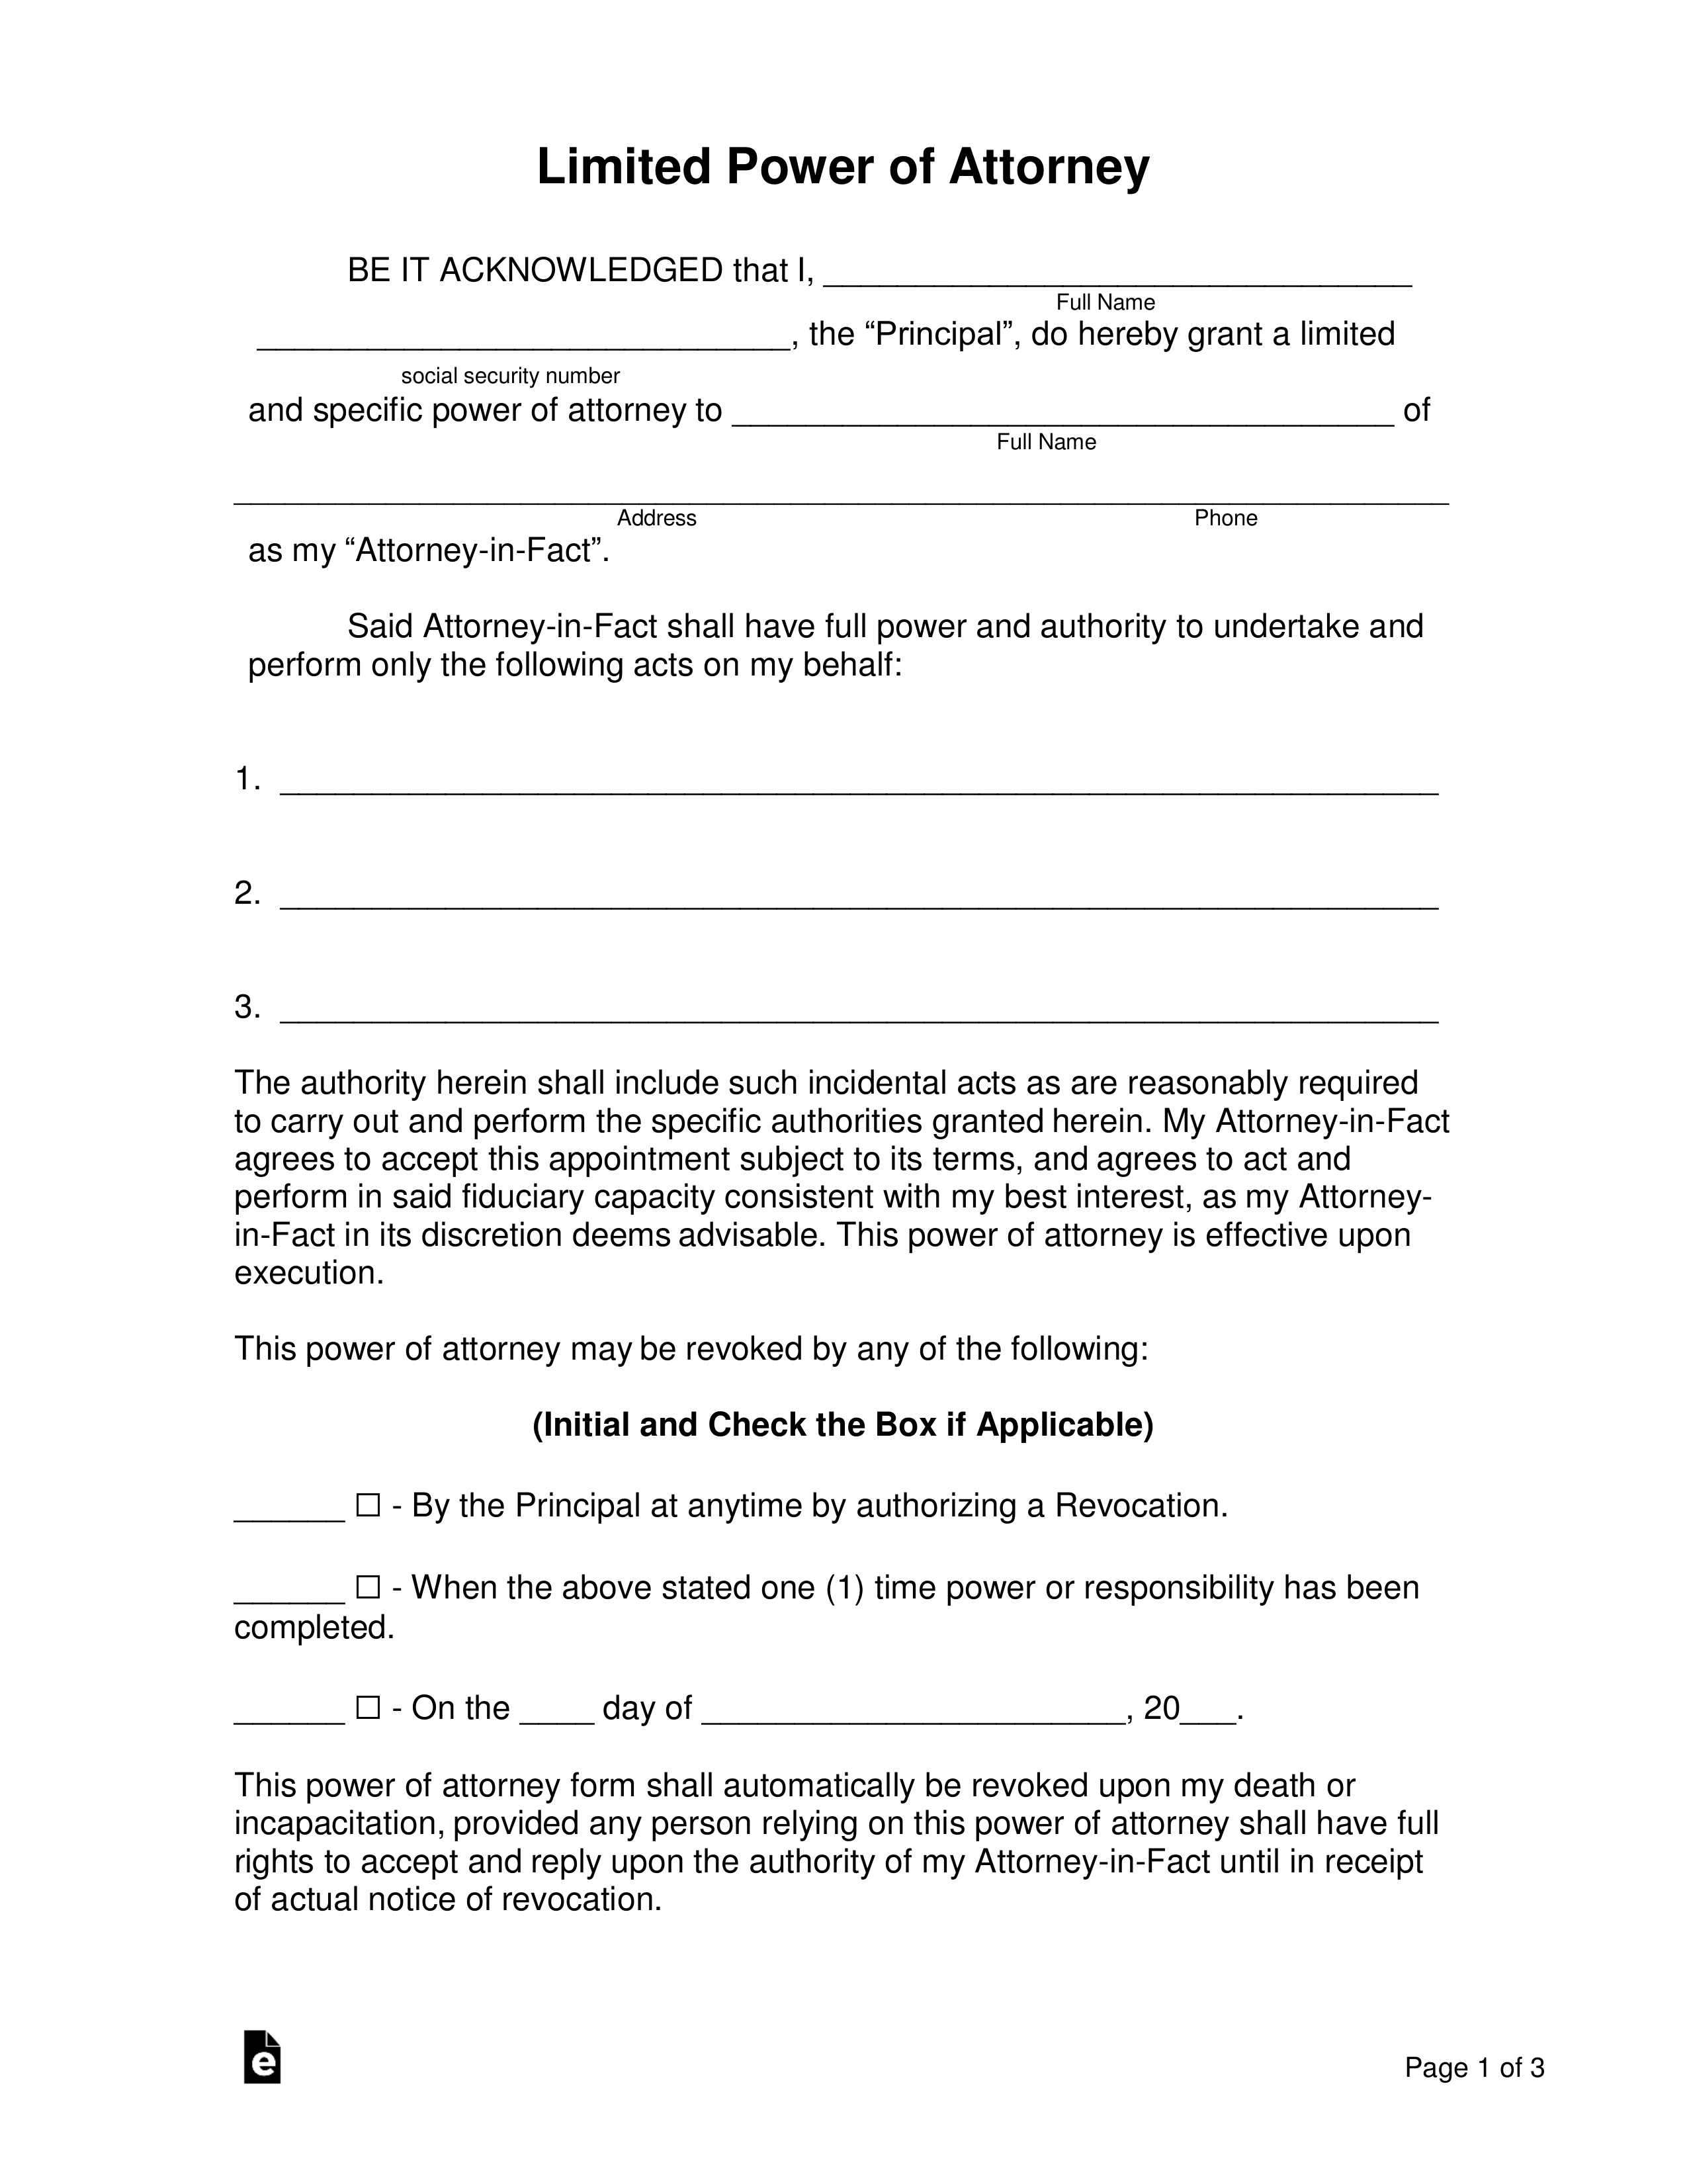 bank power of attorney form south africa
 Free Limited (Special) Power of Attorney Forms - PDF | Word ...